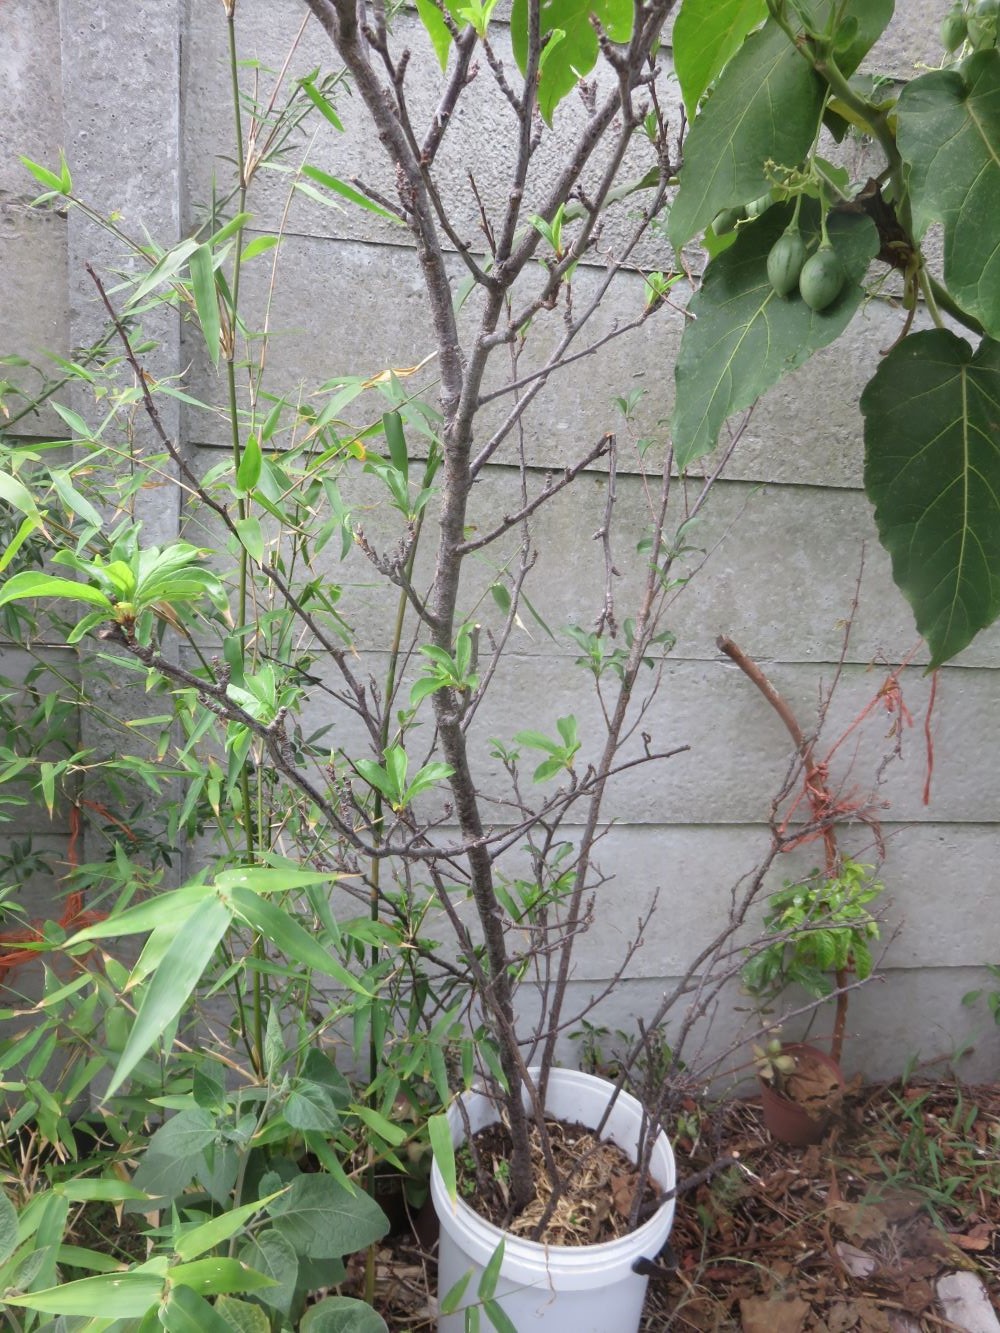 Some two meter long plum truncheons. Most of them put out leaves. However, I do not know if they have rooted.